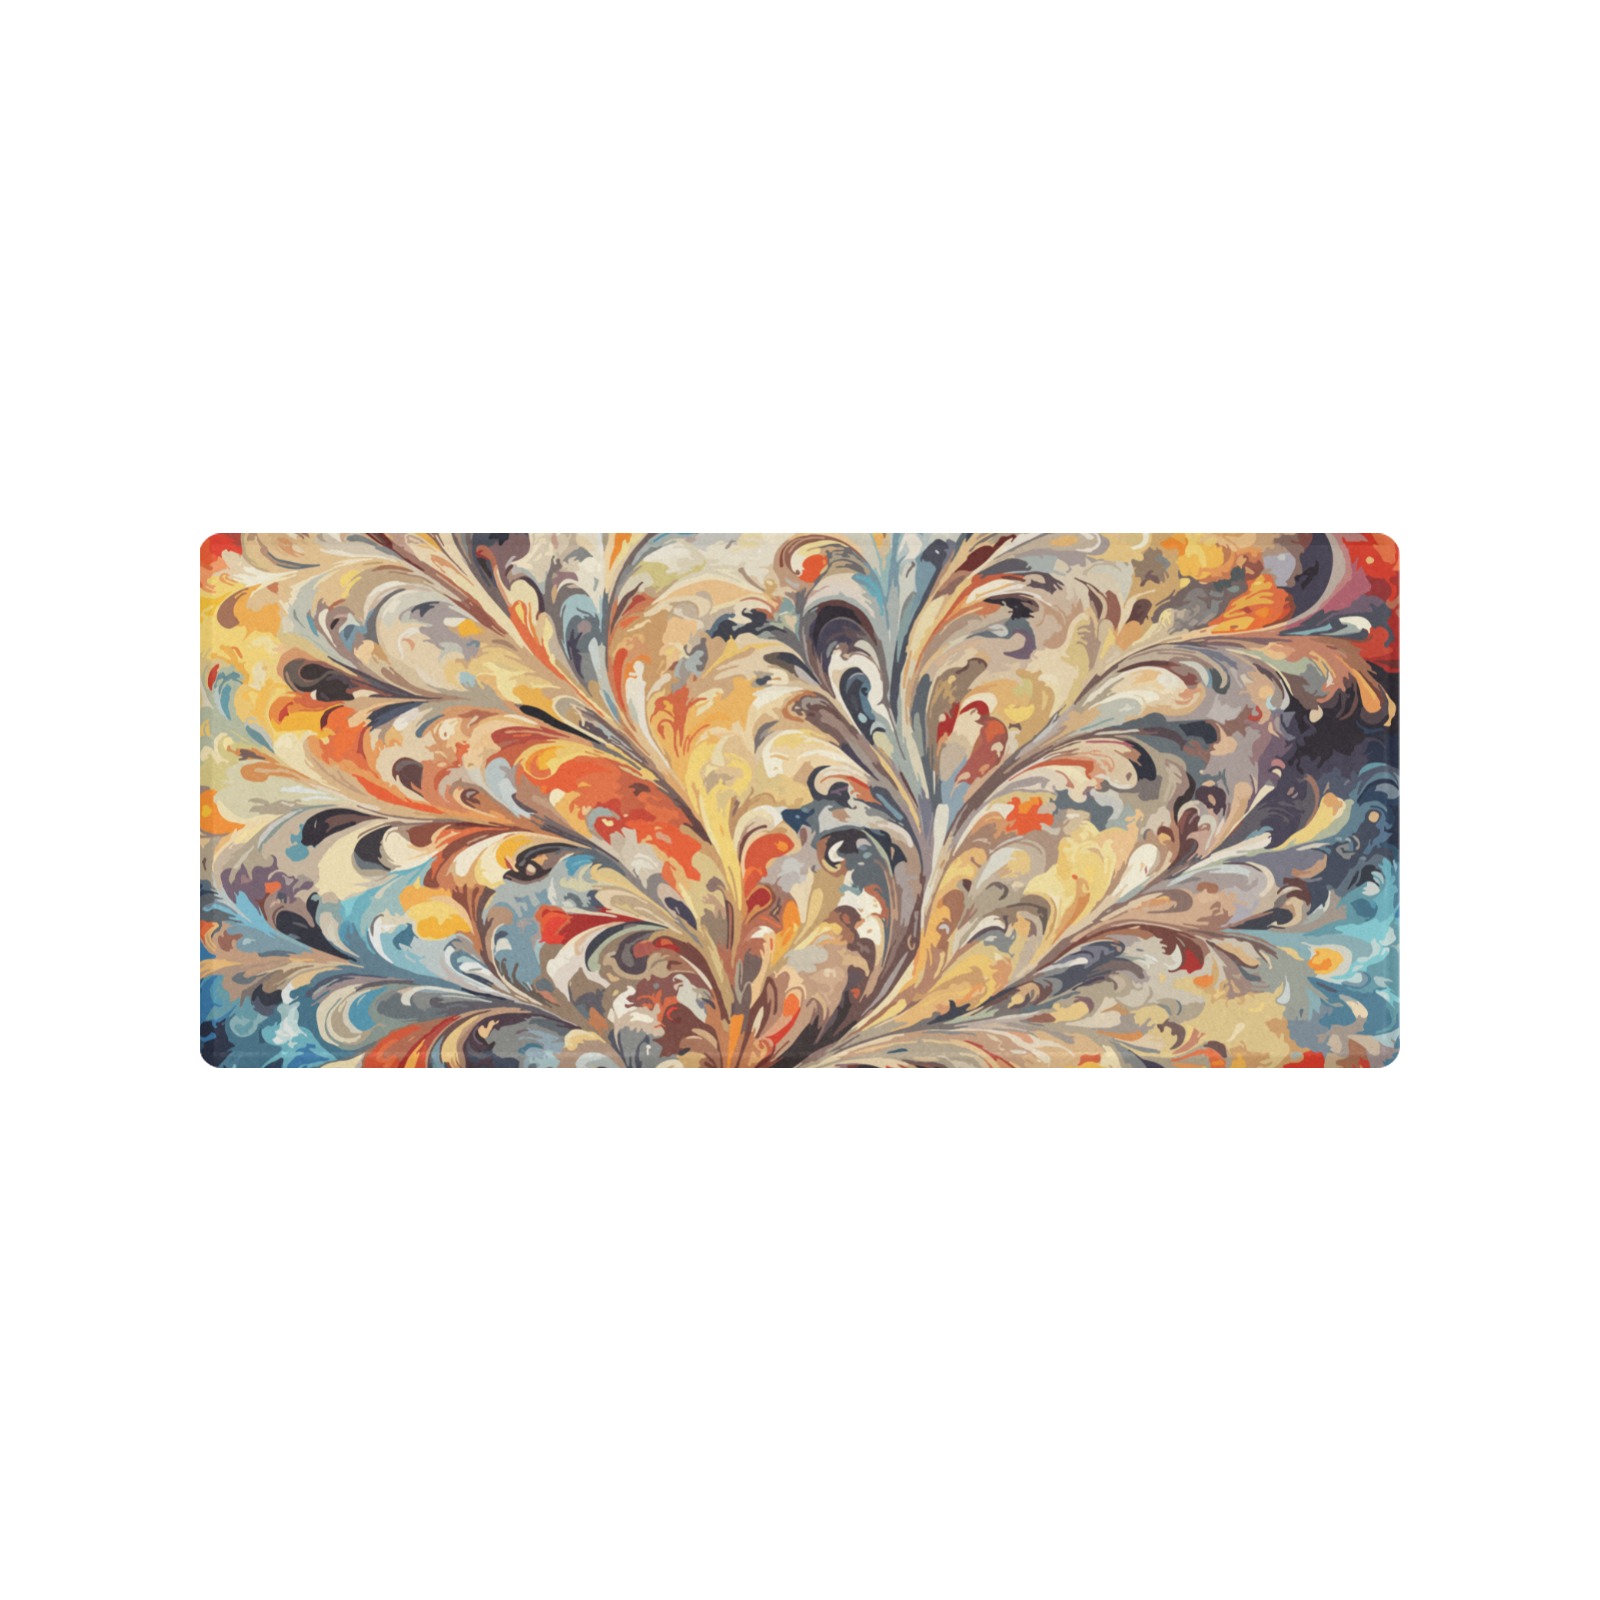 Glamour decorative floral ornament. Amazing art Gaming Mousepad (35"x16")